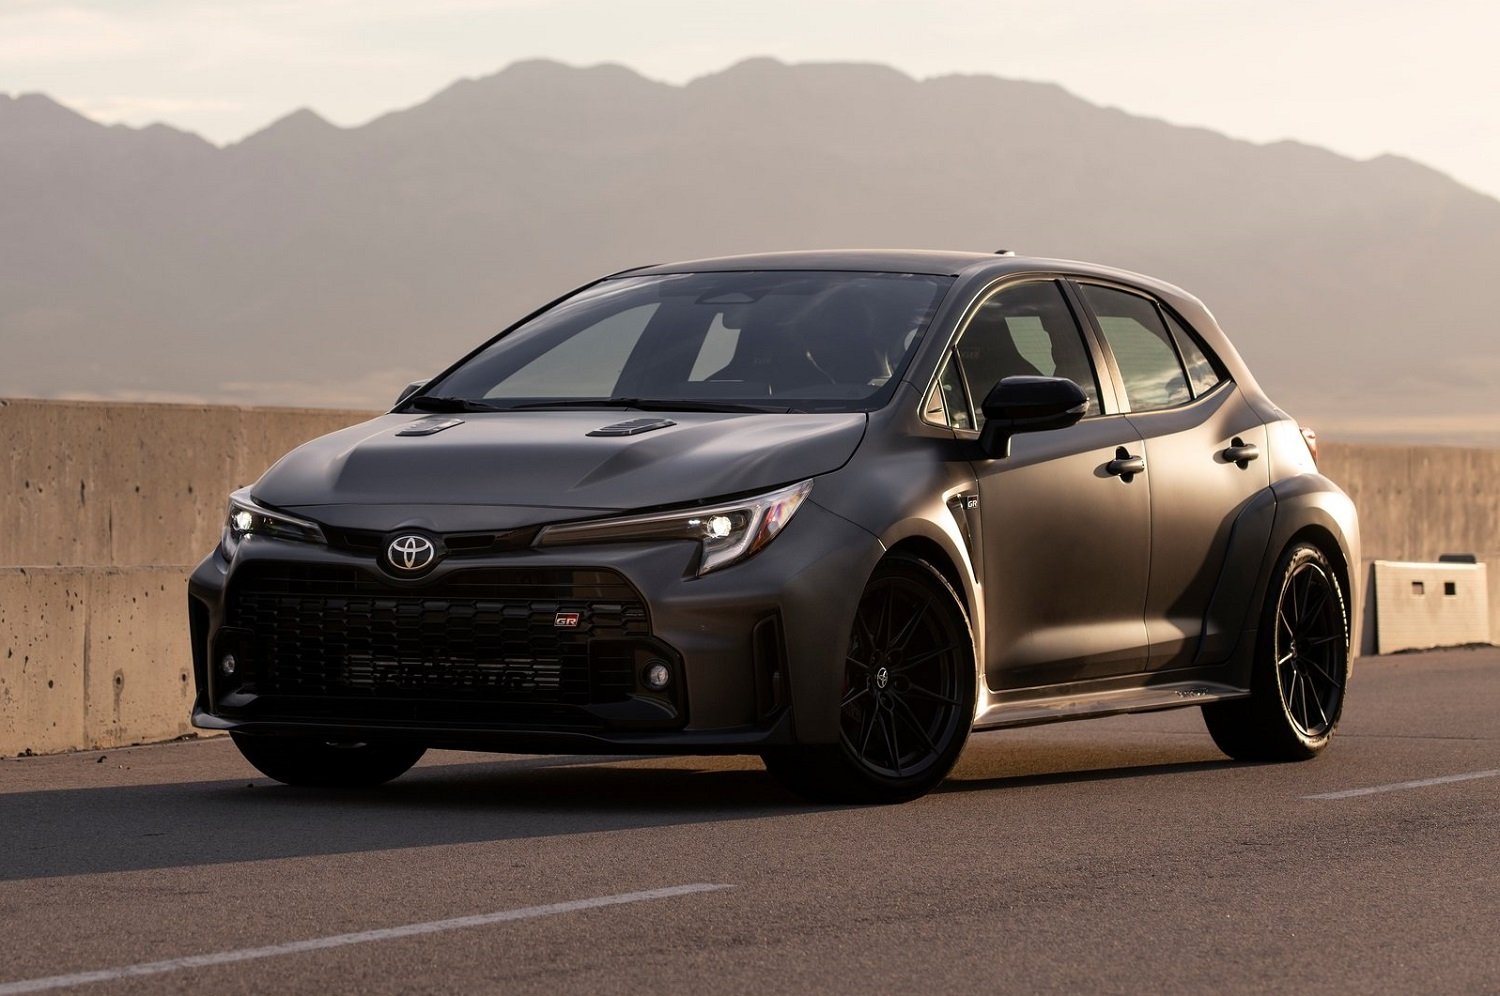 South Africa: Toyota’s GR Corolla to hit SA market